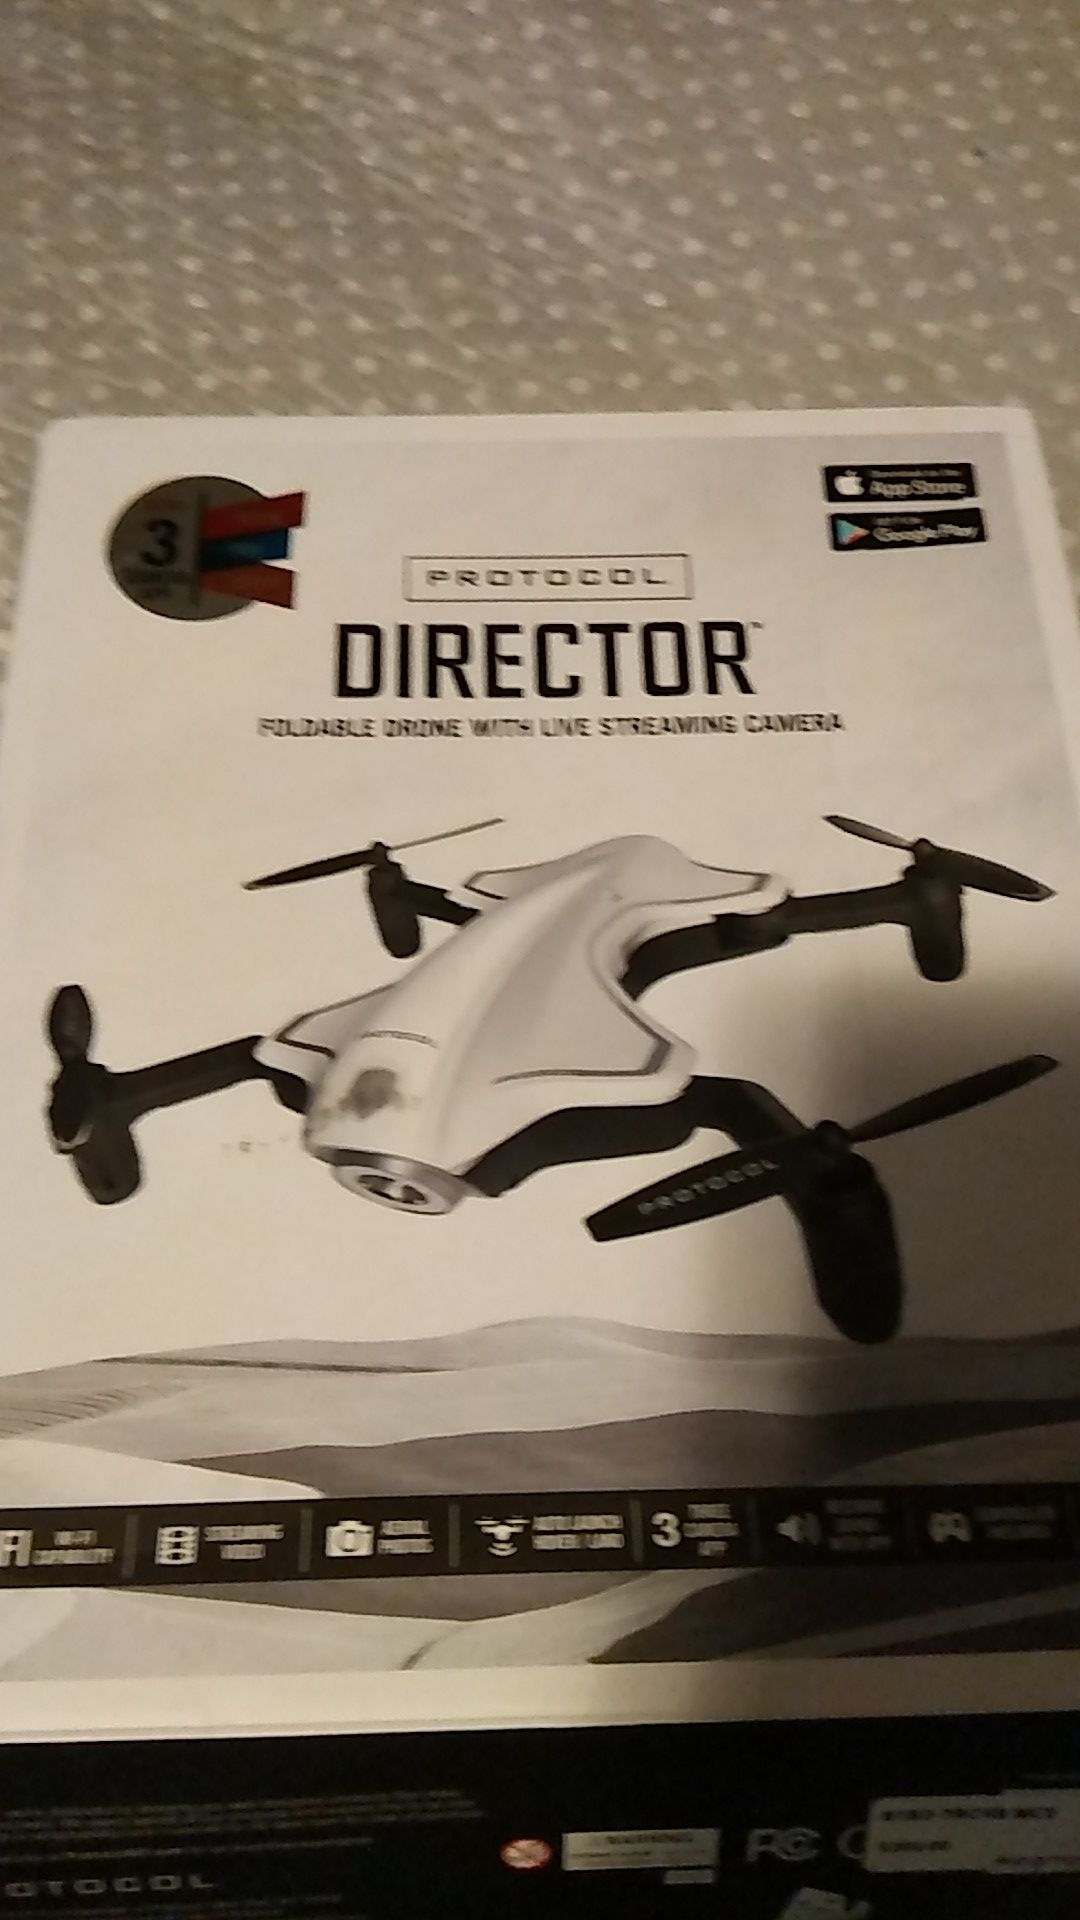 Protocol Director Foldable drone with live streaming camera new but has little crack on corner